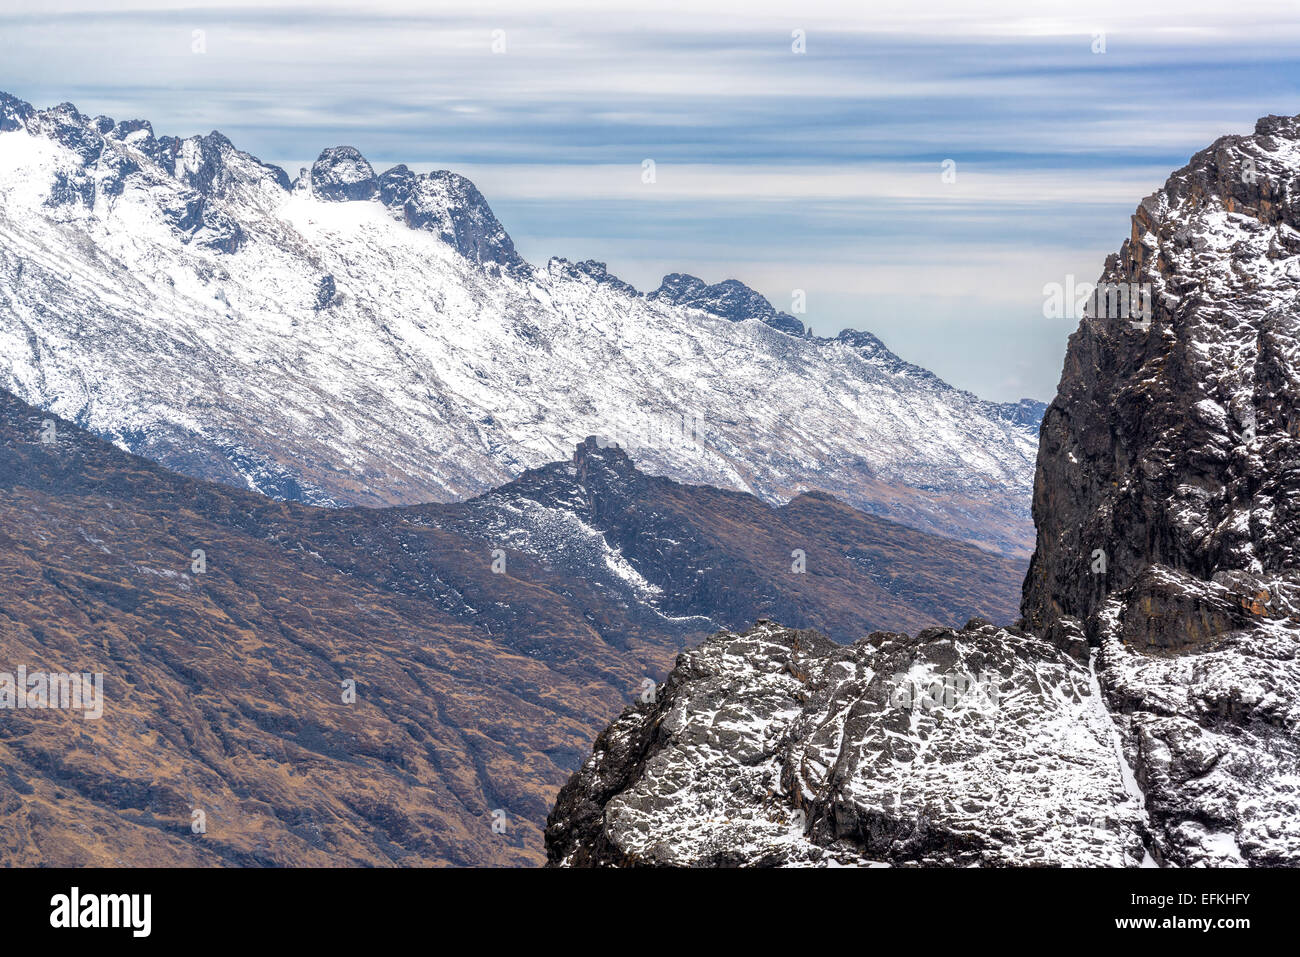 View of the Andes mountains in the Cordillera Real near La Paz, Bolivia Stock Photo